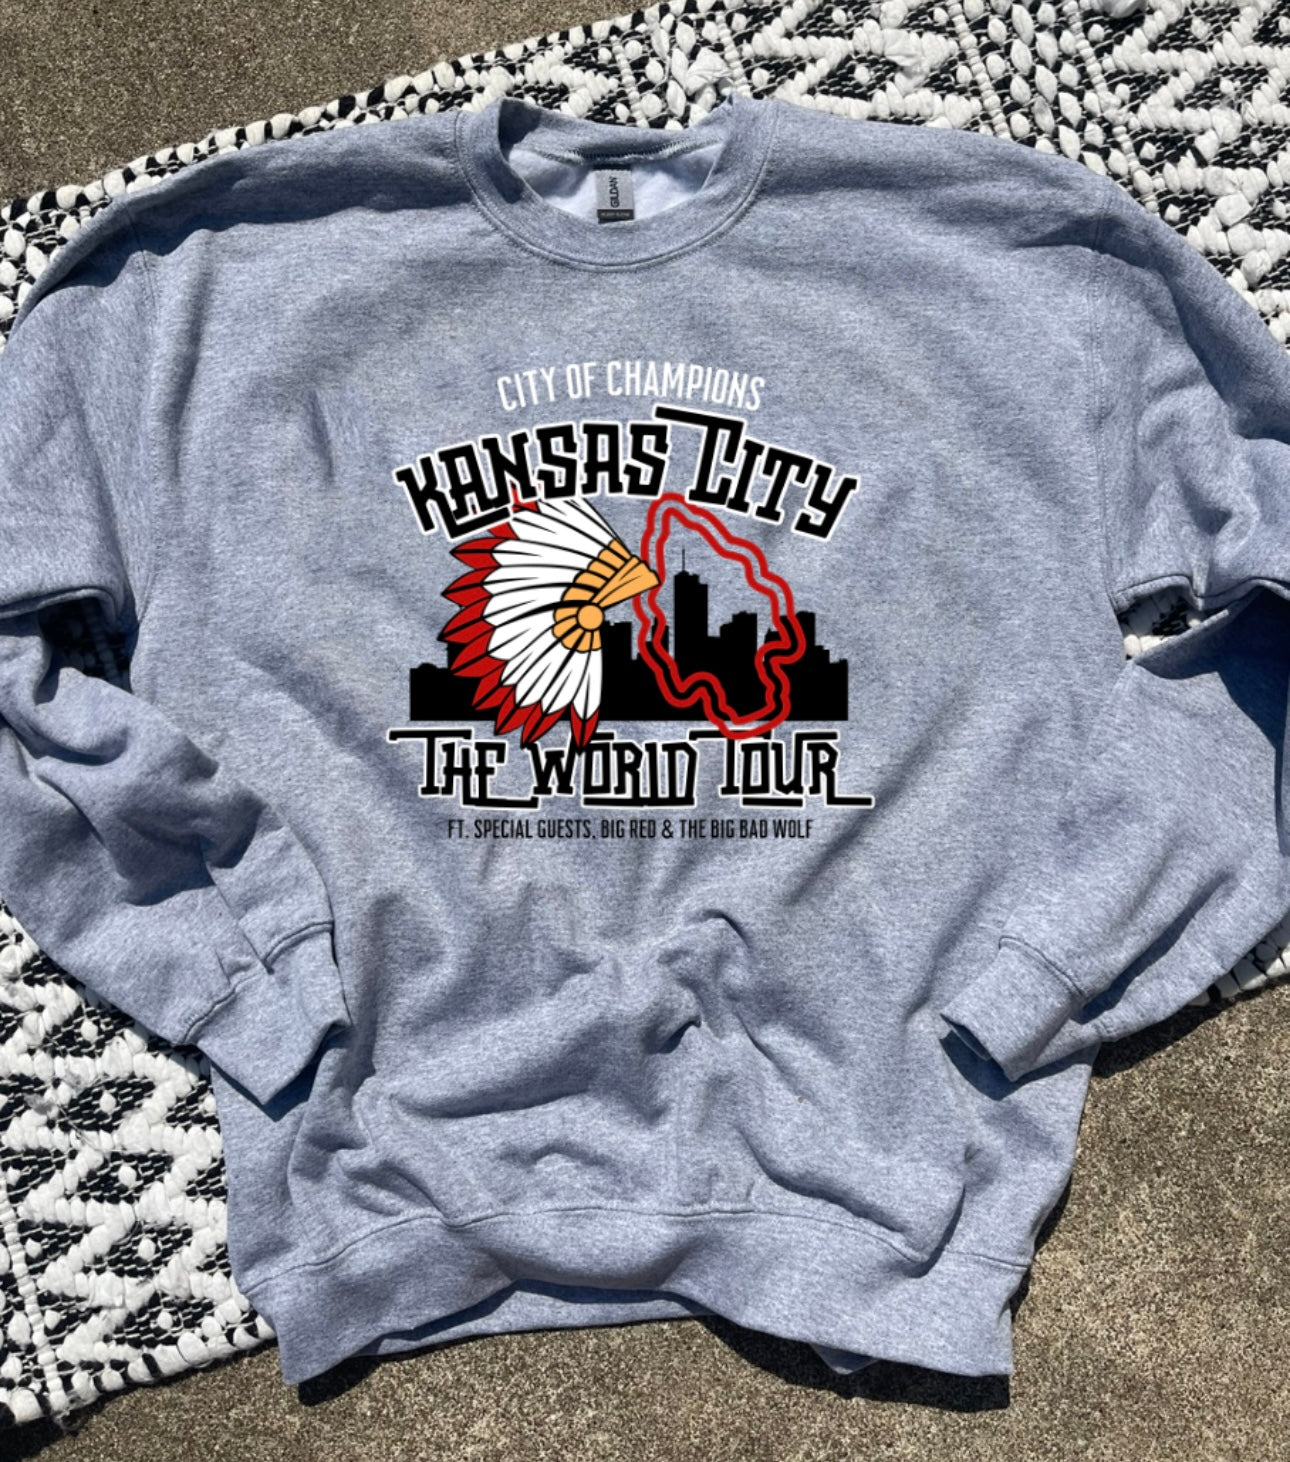 **HALFTIME DEAL** City Of Champions The World Tour Sports Grey Sweatshirt